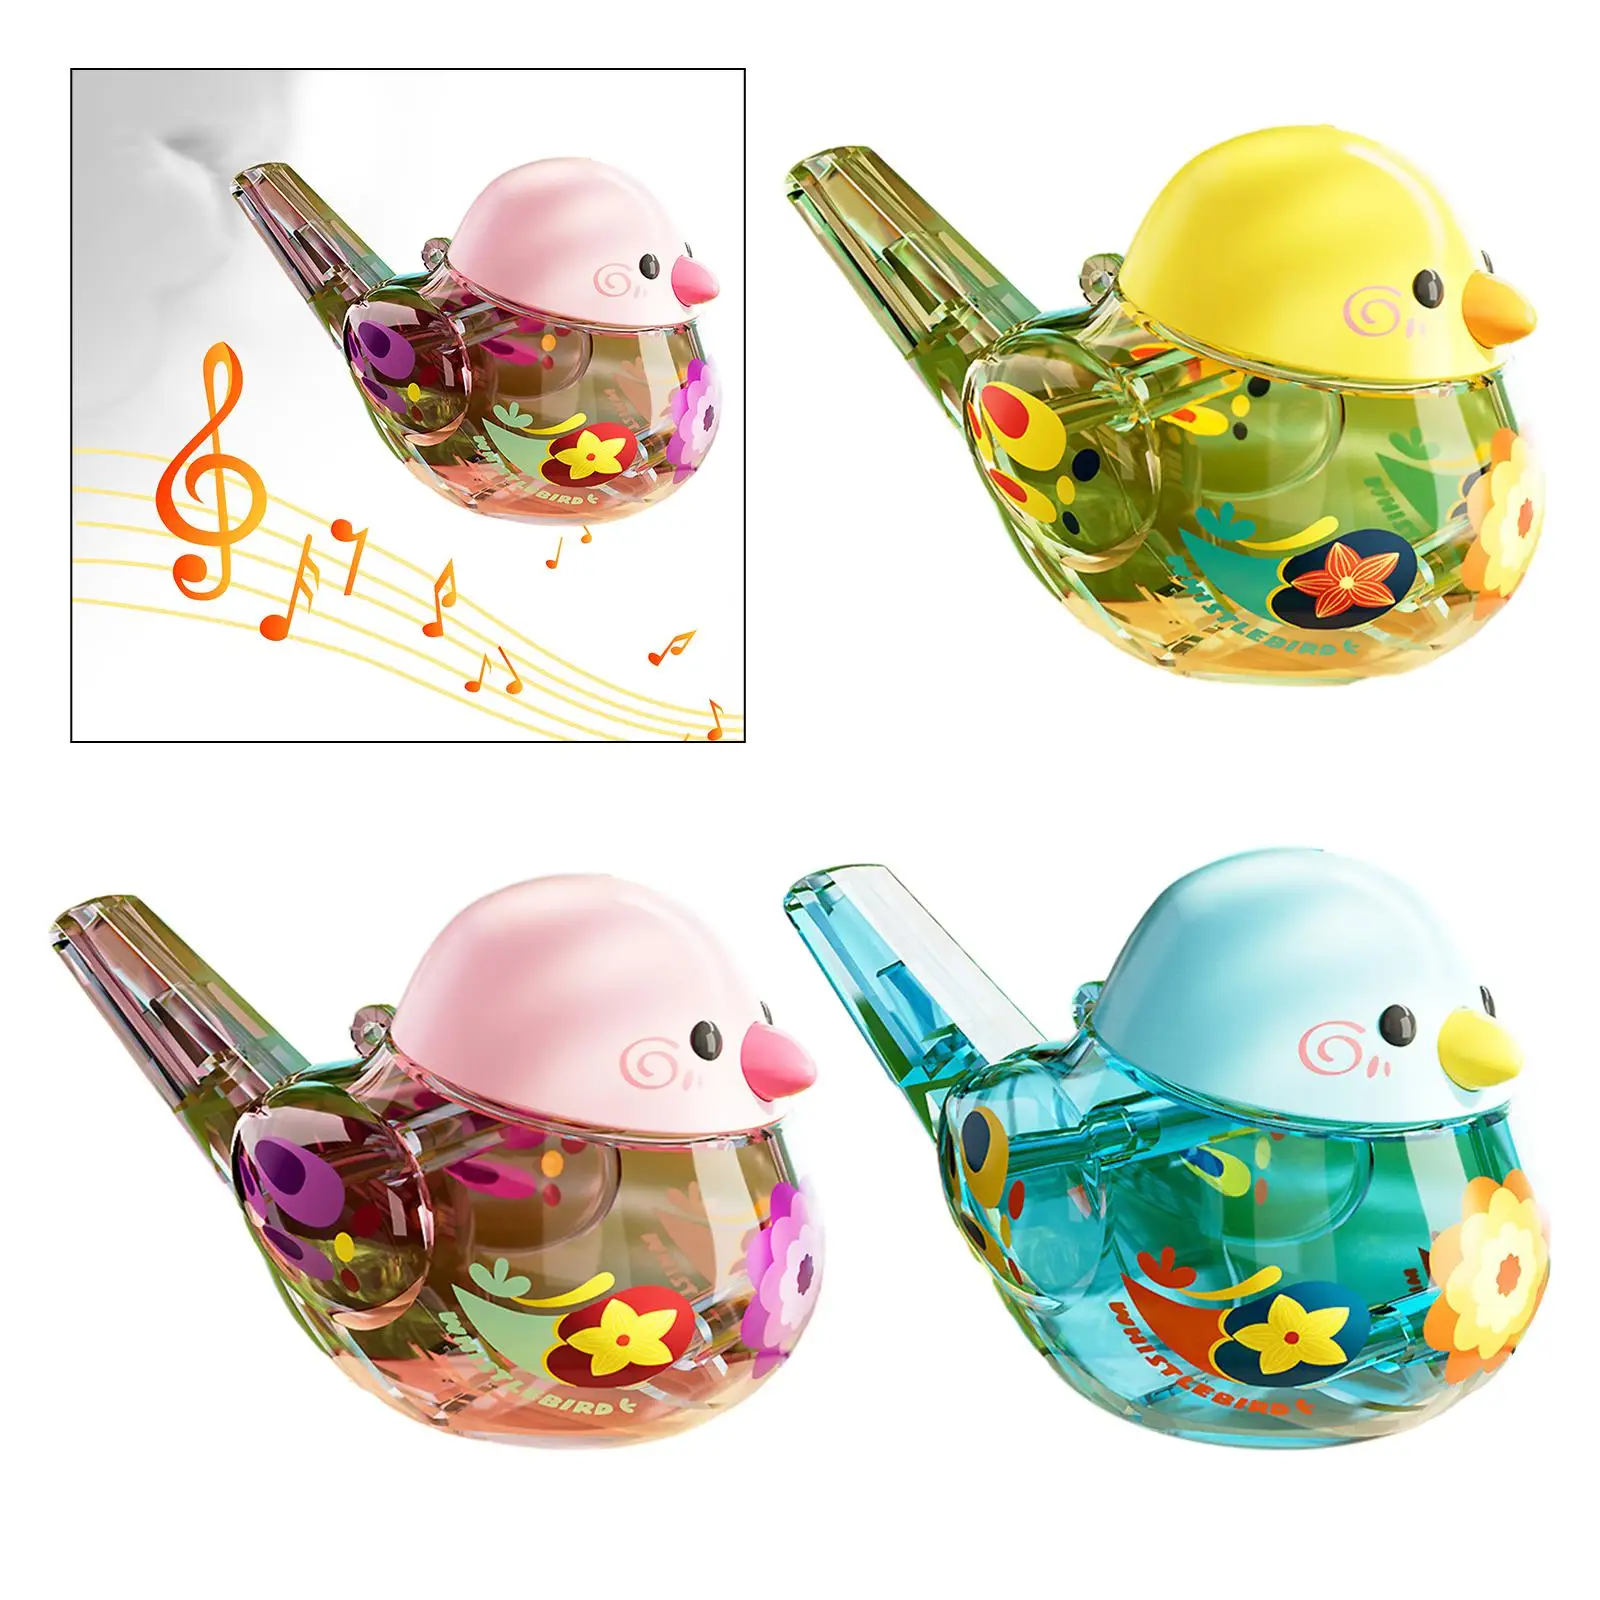 Water Whistle Toy Party Favor Bath Toy Easter Gift Noise Makers Early Educational Toy Cartoon Musical Instrument Toy